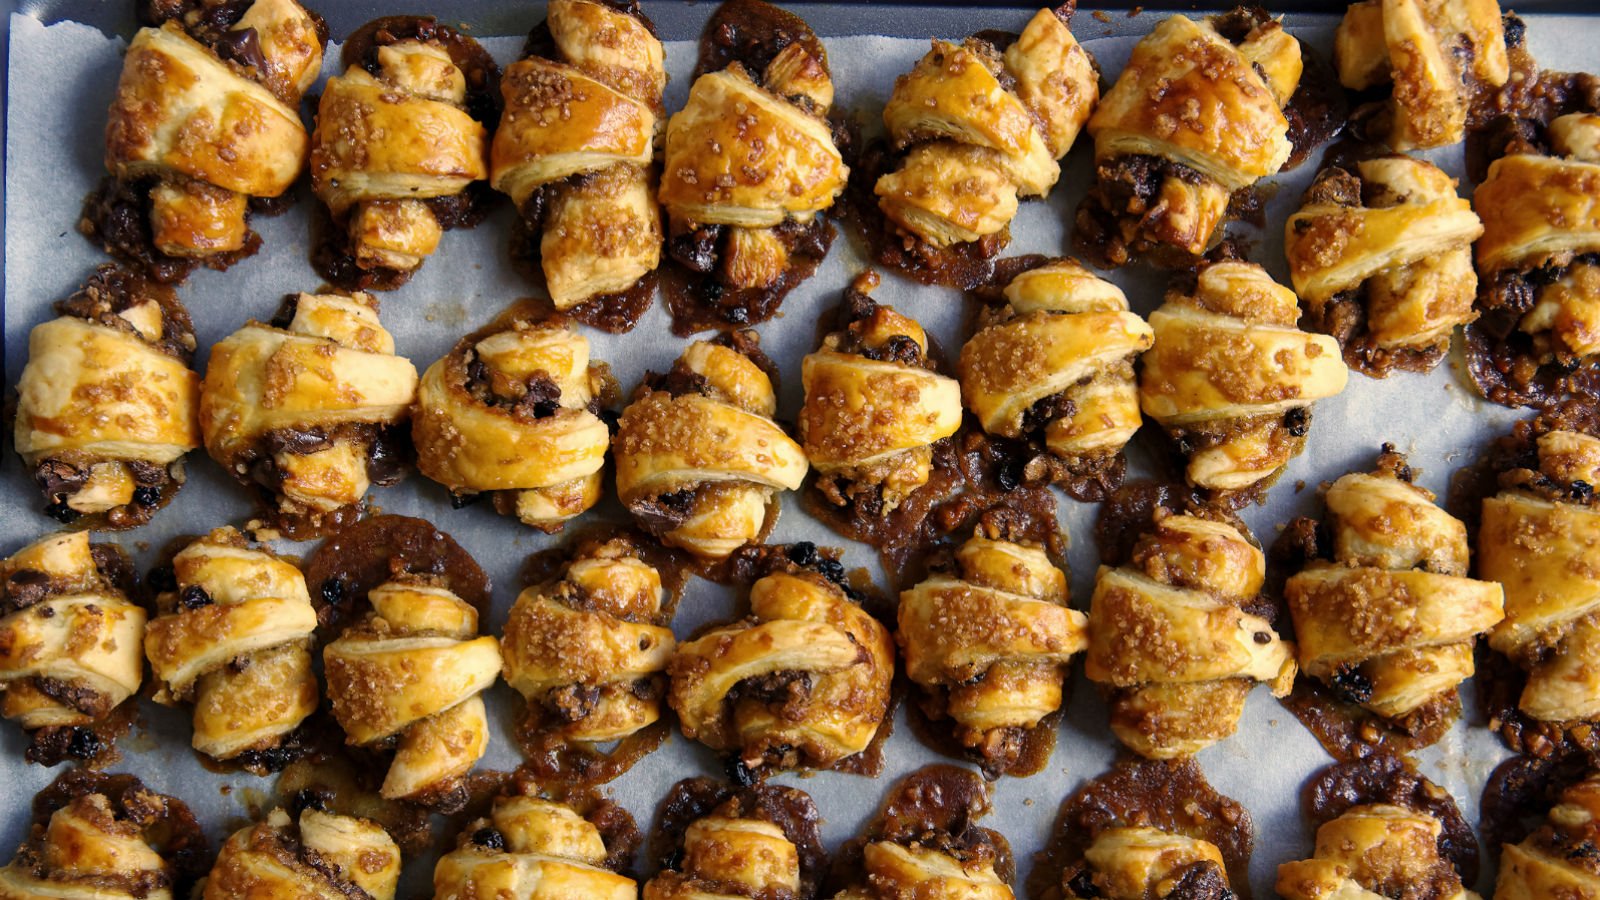 12 Sweet & Savory Rugelach Recipes You’ll Want to Make Immediately